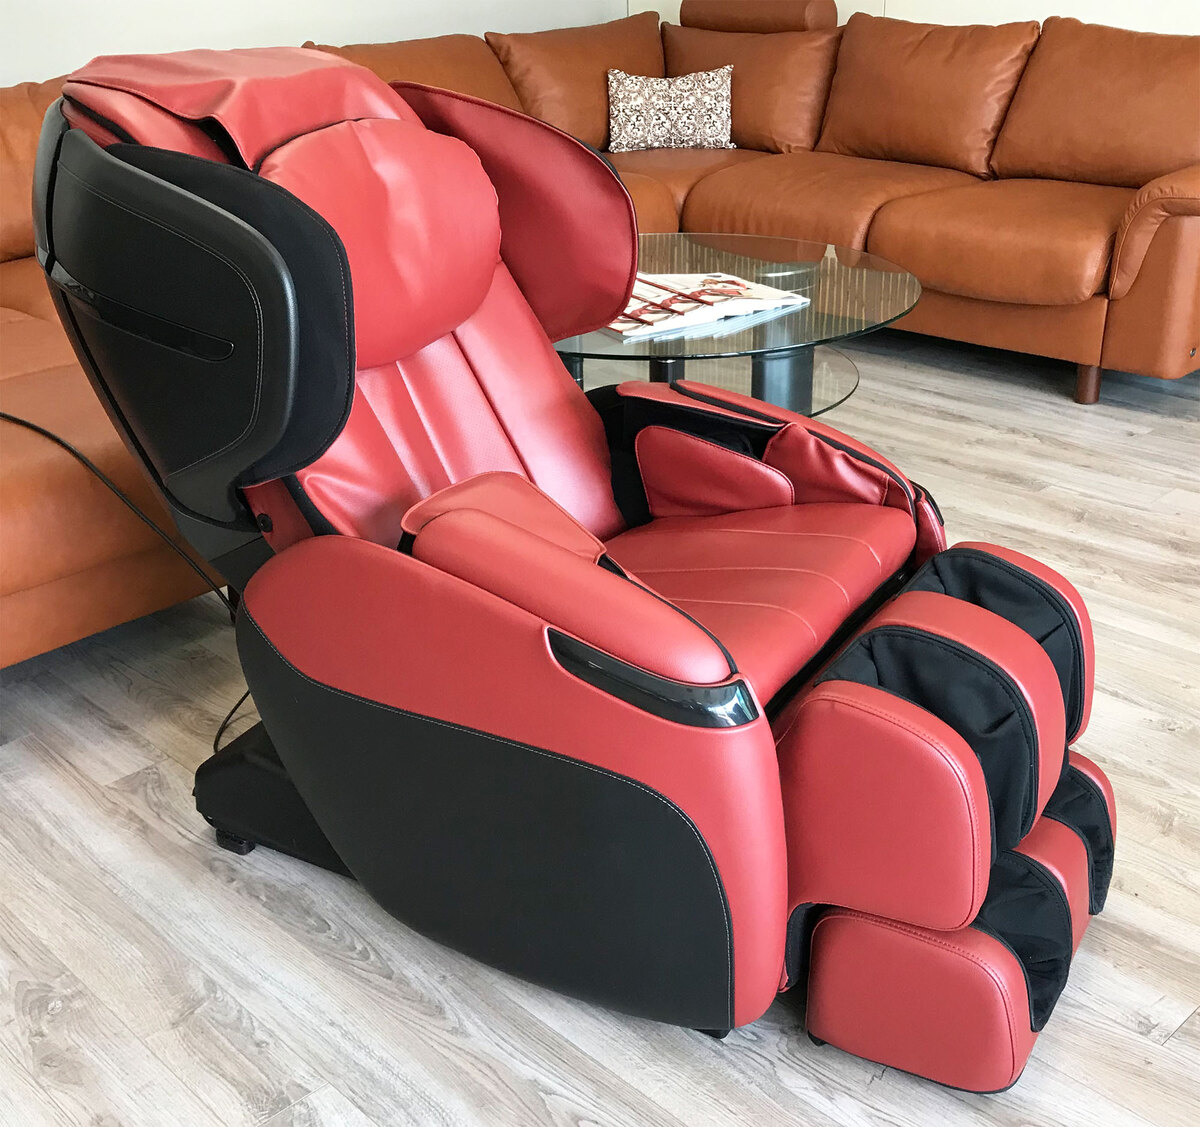 How To Build Recliner Massage Chair Storables